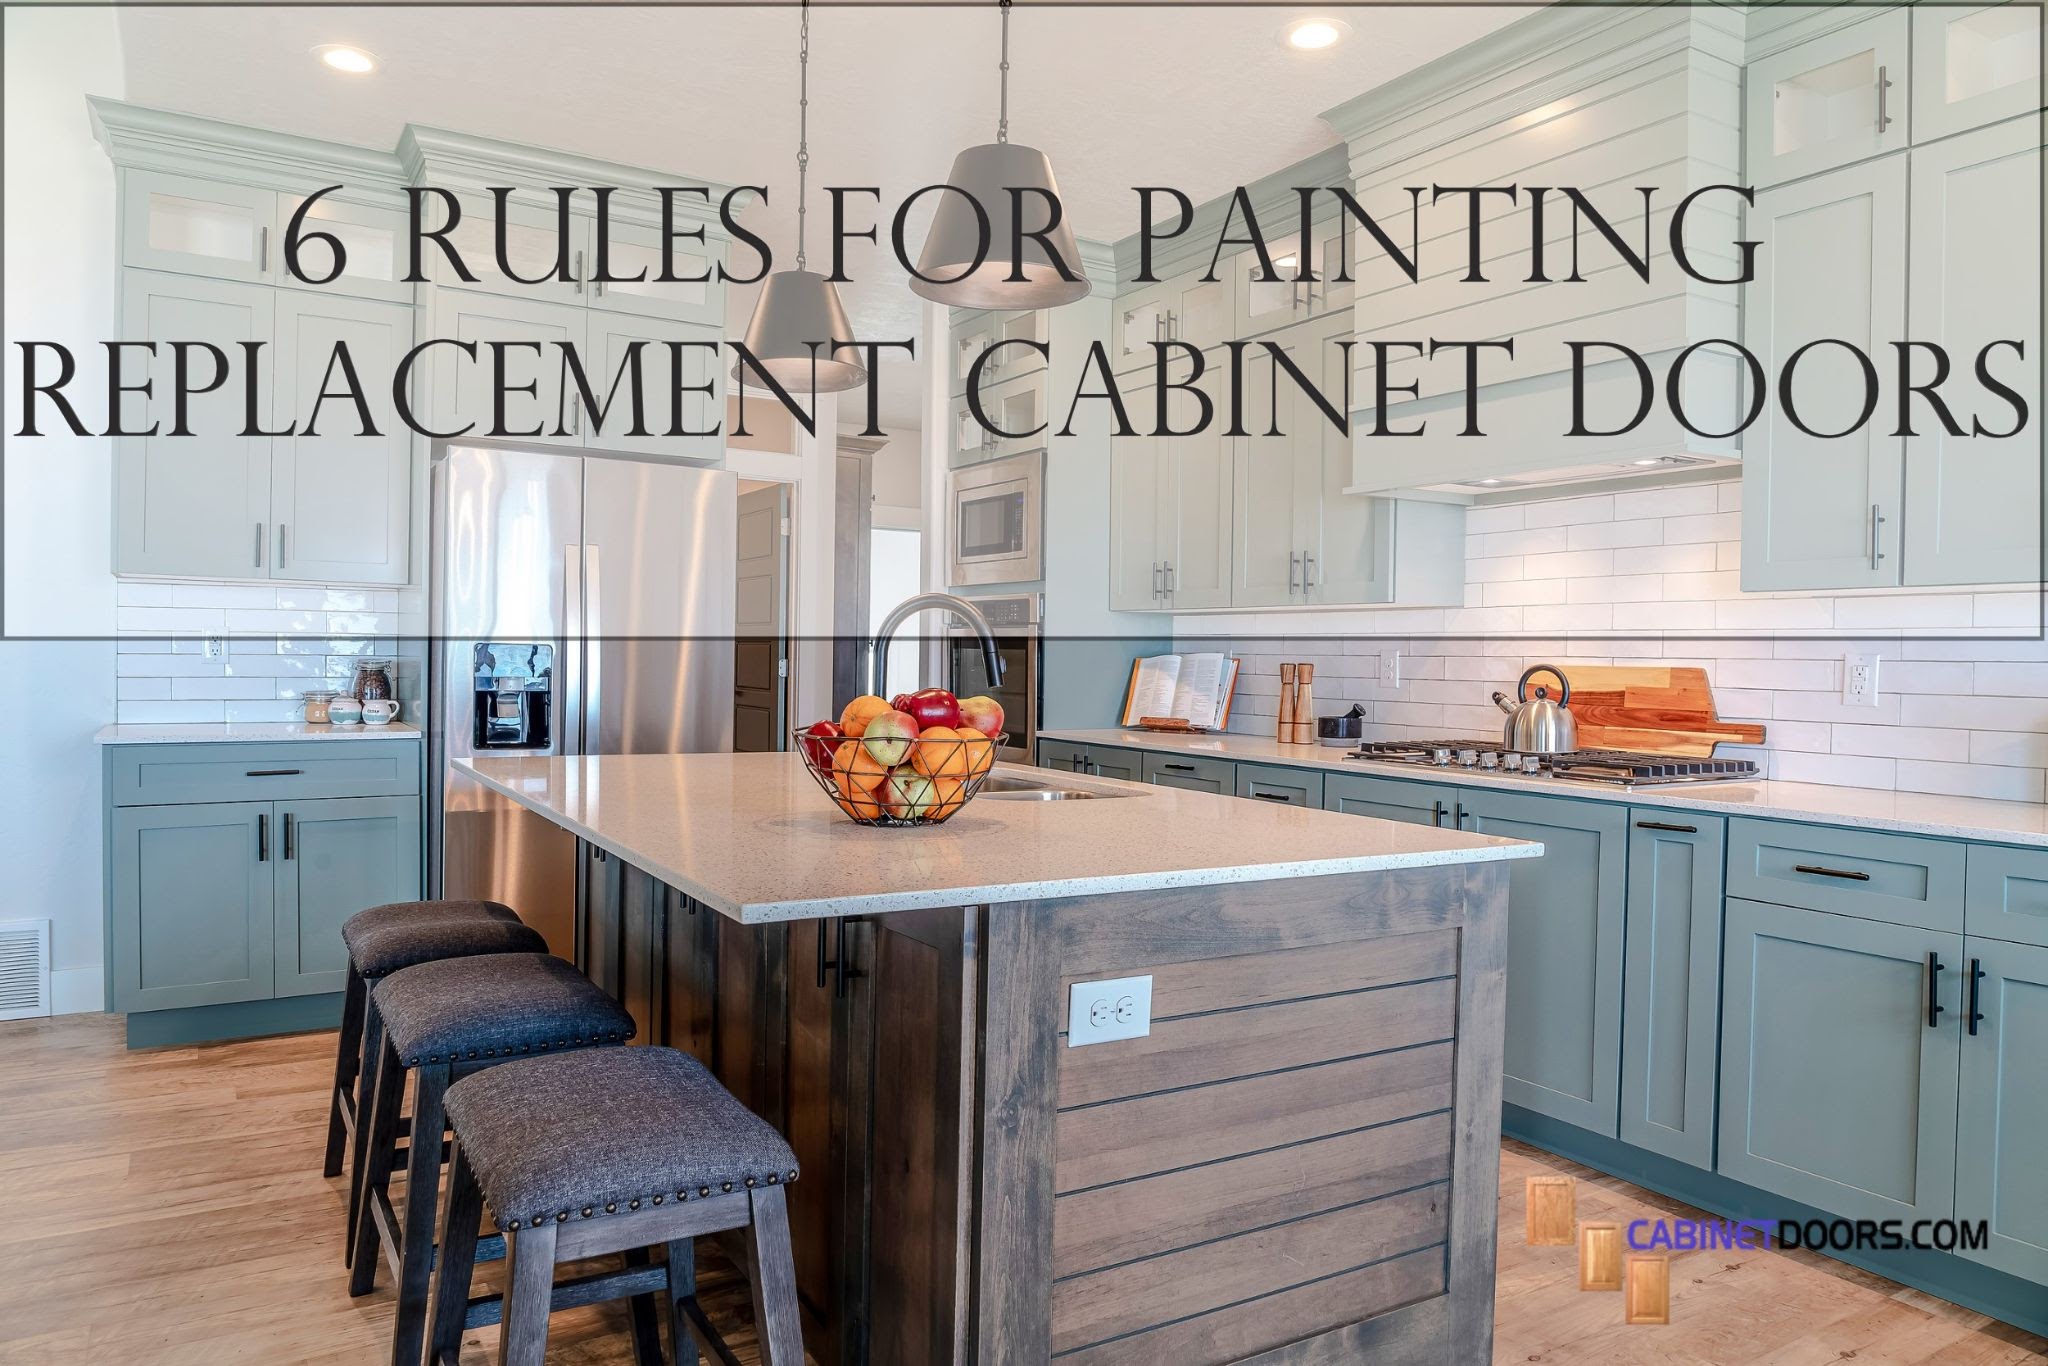 6 Rules For Painting Replacement, Should I Paint Or Replace Kitchen Cabinets